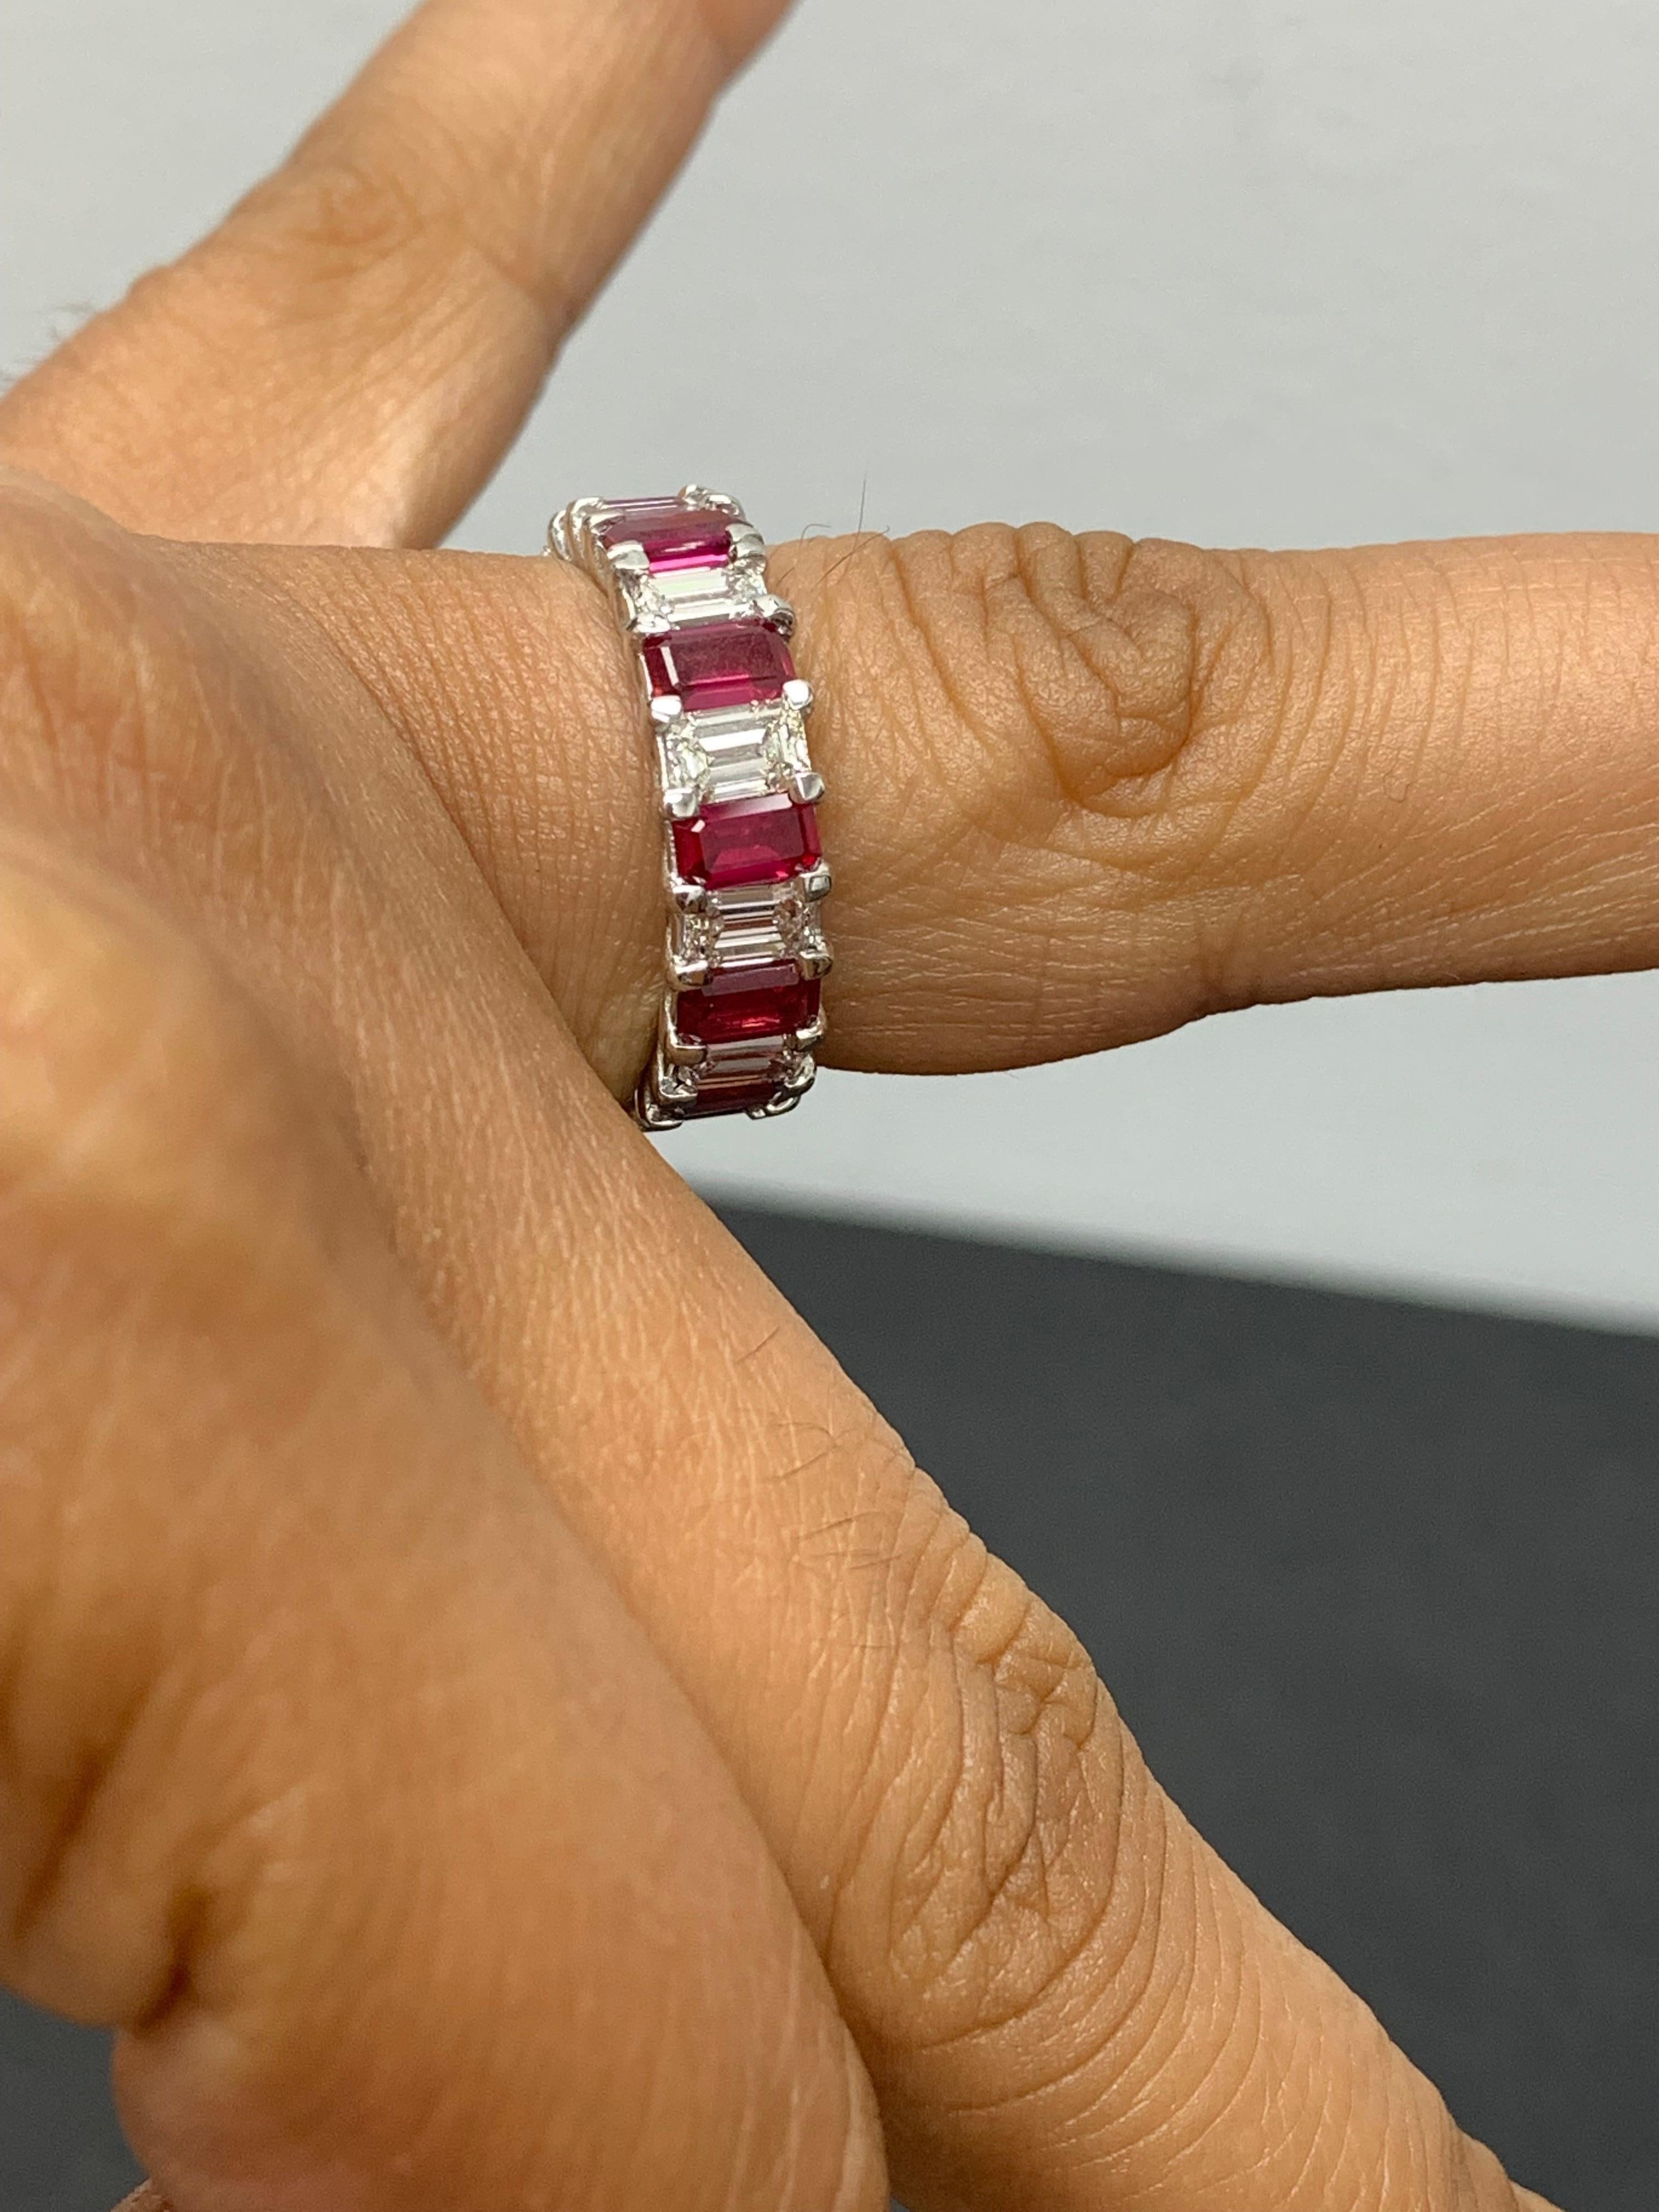 A beautiful and vibrant eternity wedding band style showcasing emerald cut rubies and emerald cut diamonds set alternating to each other in a shared prong 14K white gold mounting. 11 emerald cut Diamonds weigh 1.88 carats and 11 emerald cut rubies